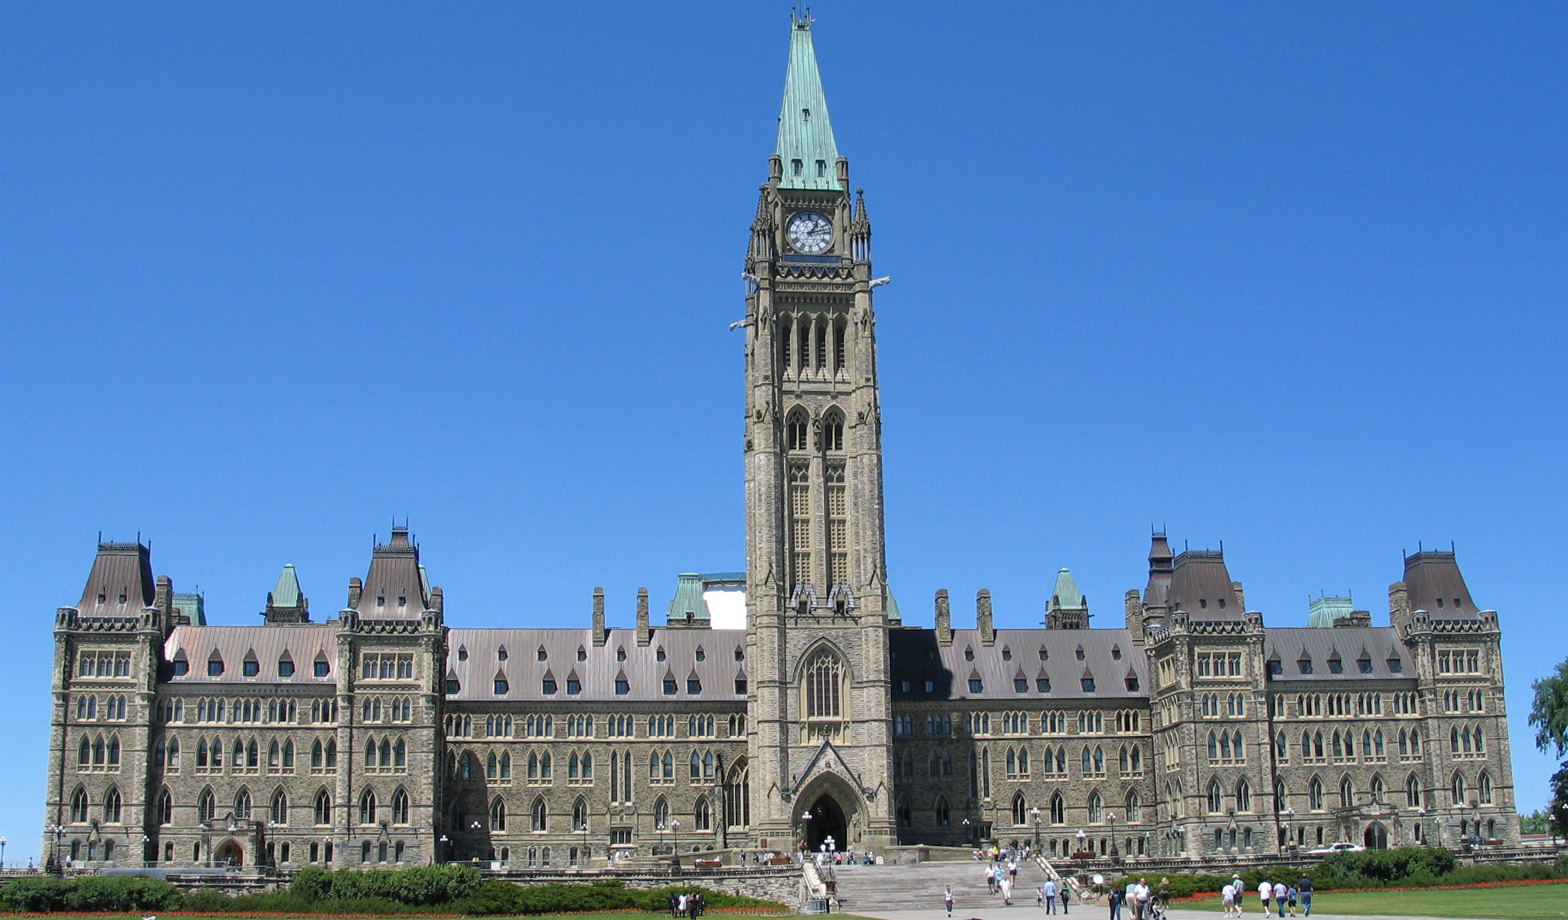 A view of the Canadian parliament building in Ottawa, Canada